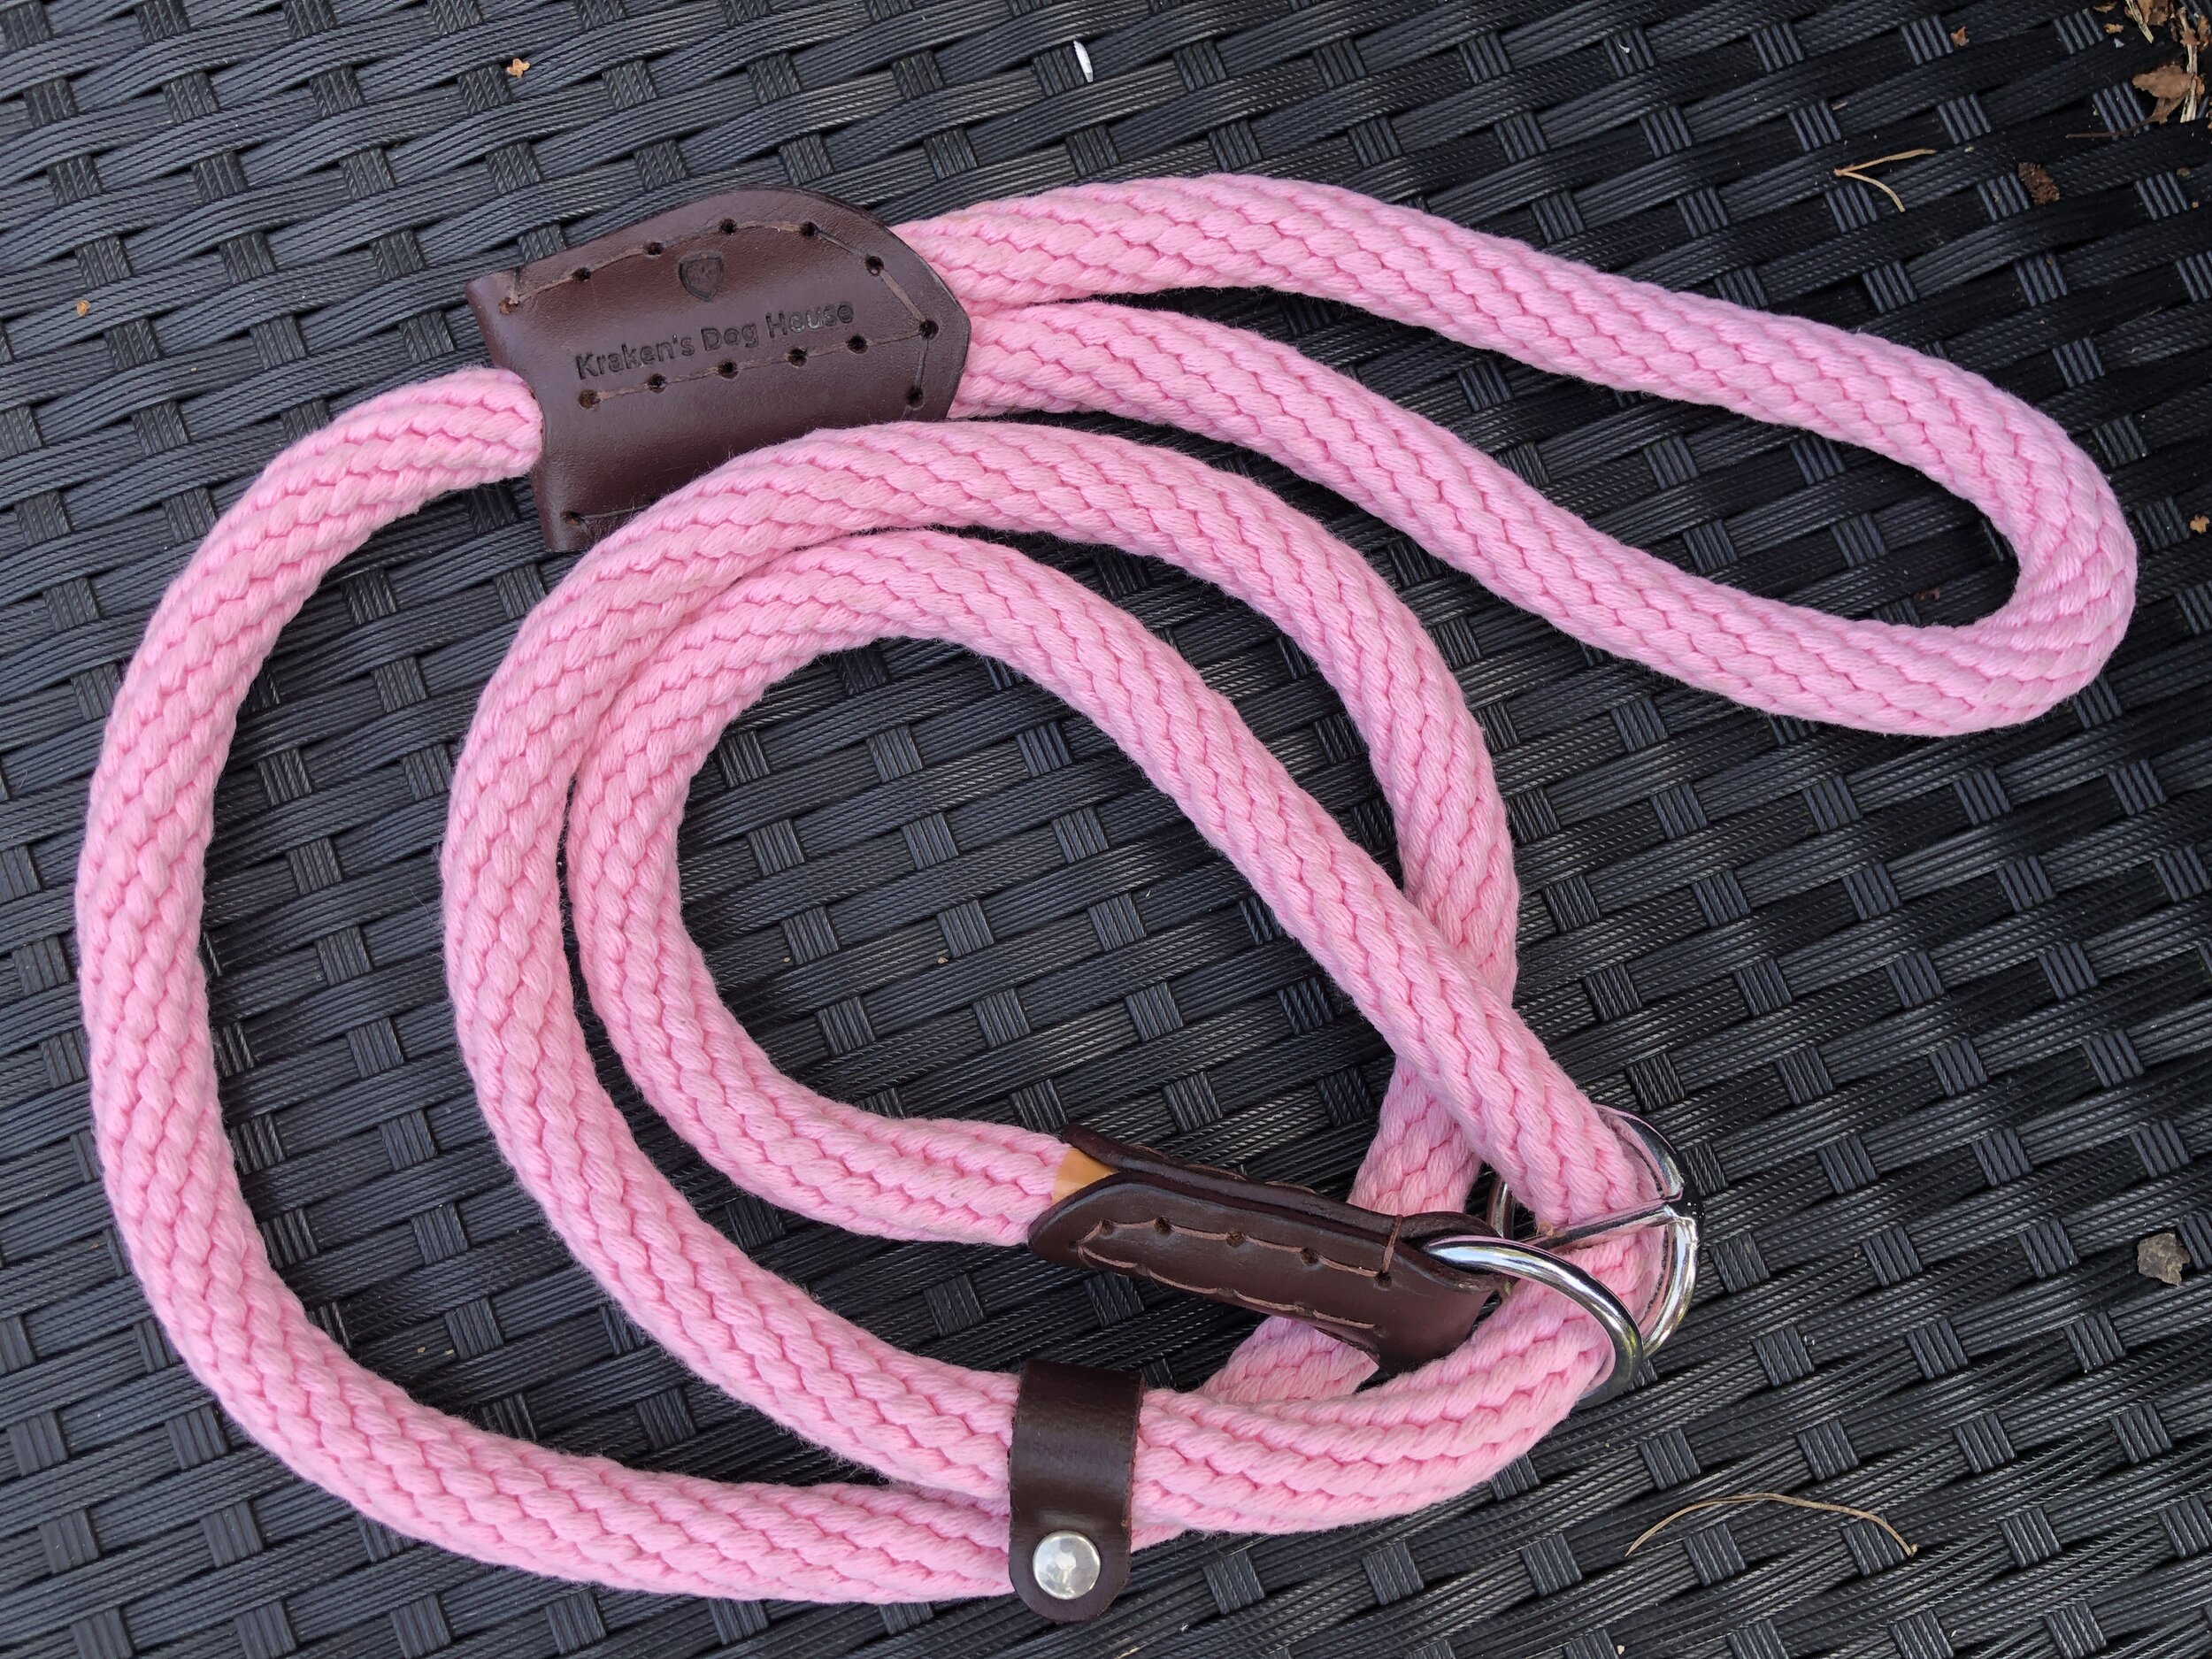 iFCOW Dog Slip Lead 2m 20mm Thickened Colorful Woven Bolt Rope Soft Horse Riding Lead Rope Halter